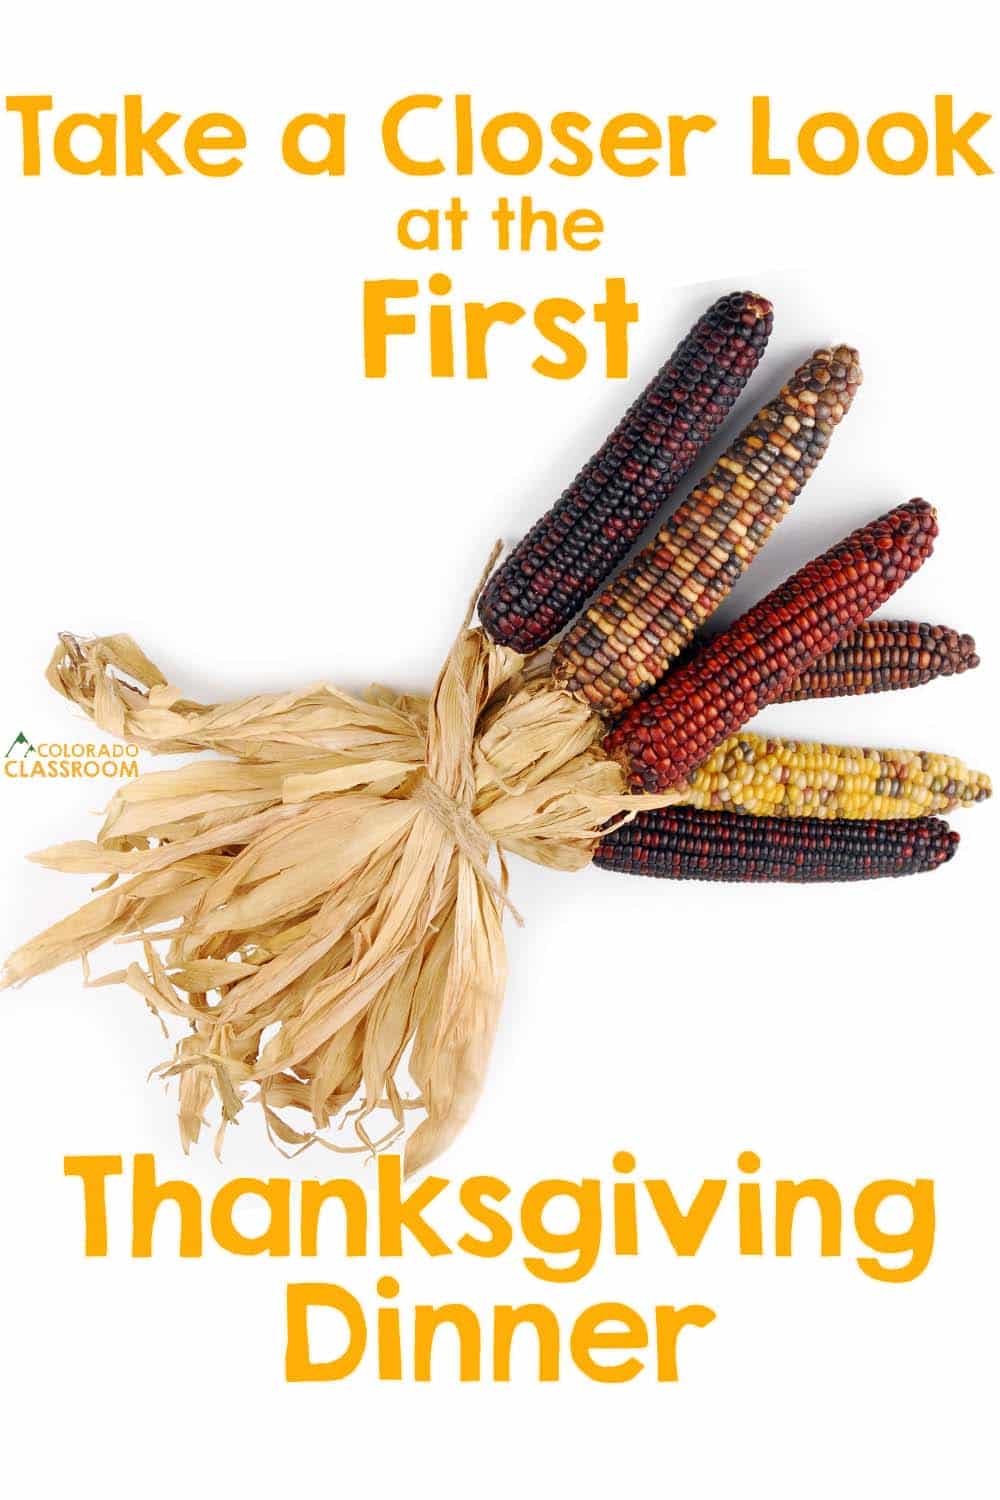 A bundle of colored corn, sometimes called Indian Corn, with the text, "Take a Closer Look at the First Thanksgiving Dinner."